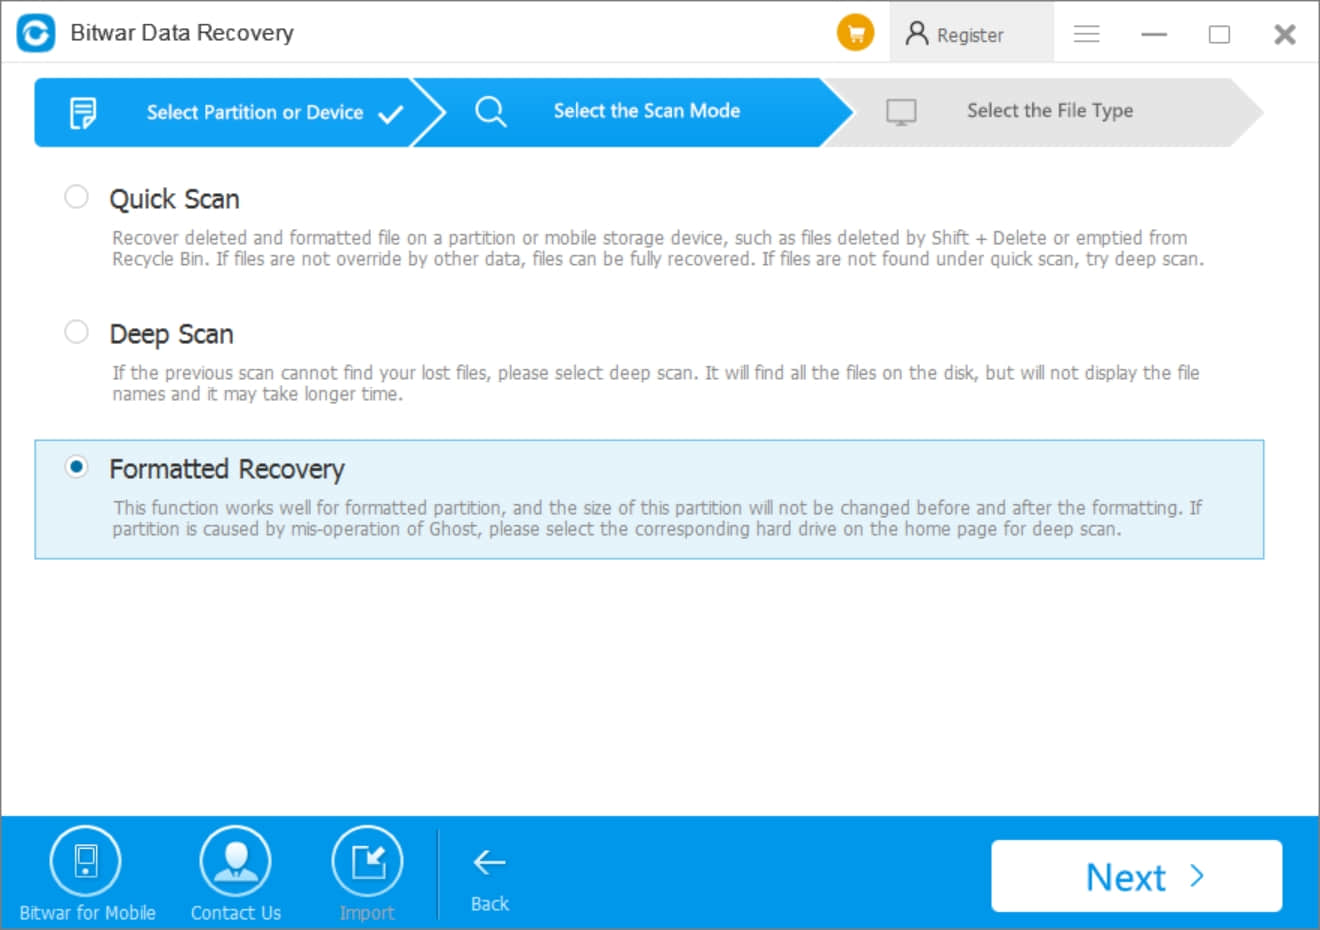 4-Data Recovery-Formatted Musics Recovery-Select Formatted Recovery